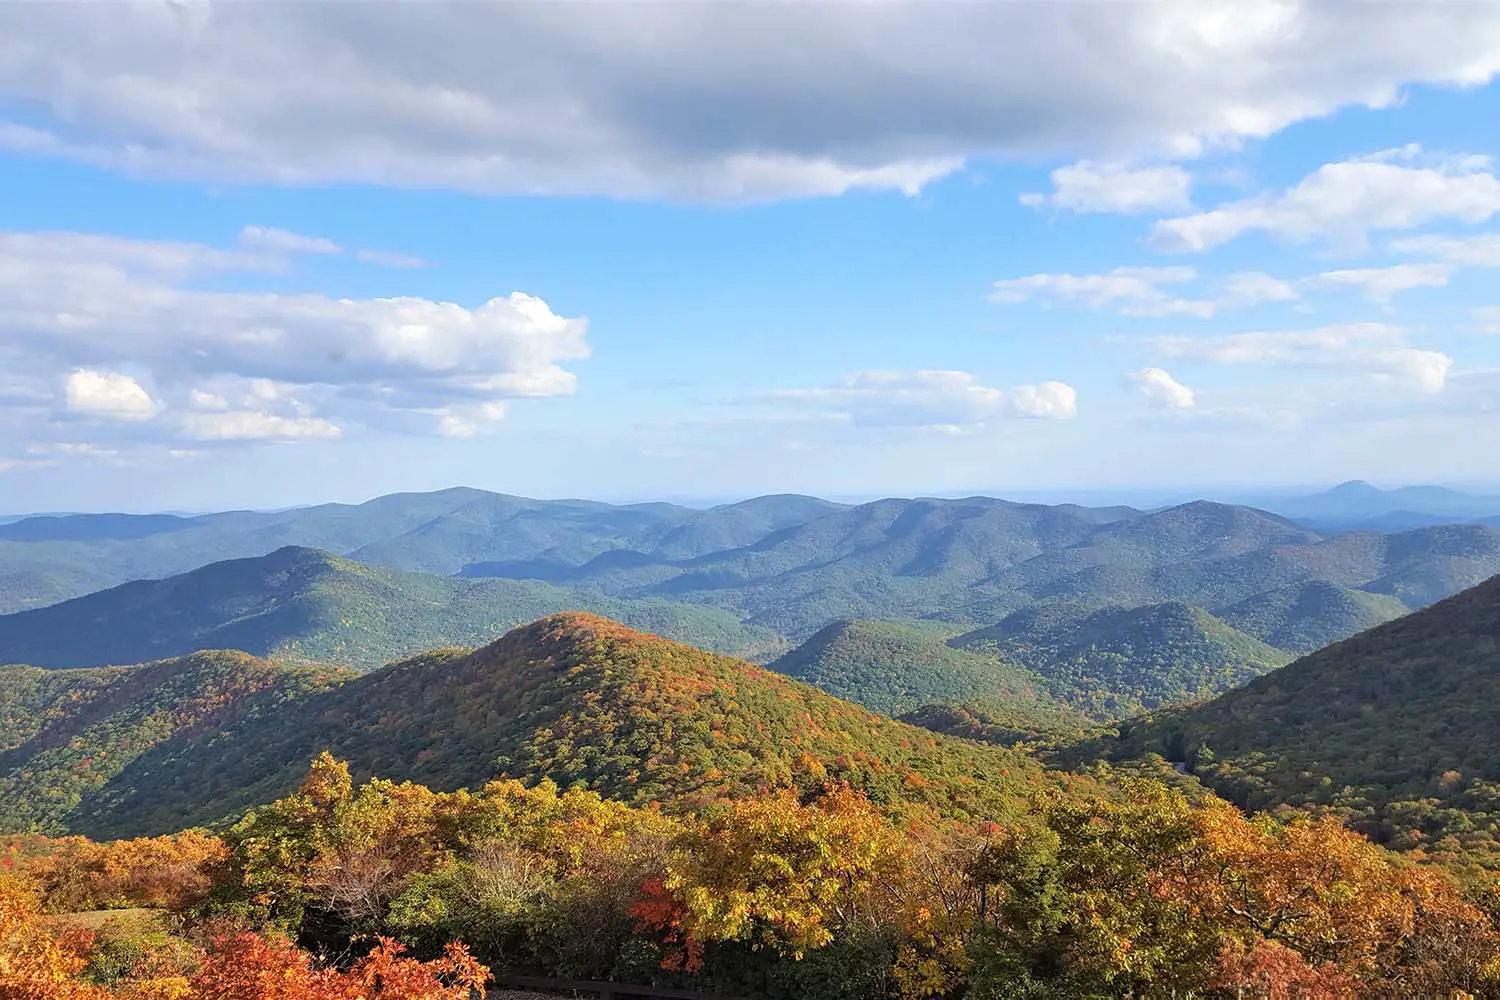 The fantastic view from Brasstown Bald mountain ( the highest mountain in Georgia) colorful in Fall season with white fluffy clouds and blue sky, North Georgia in USA.